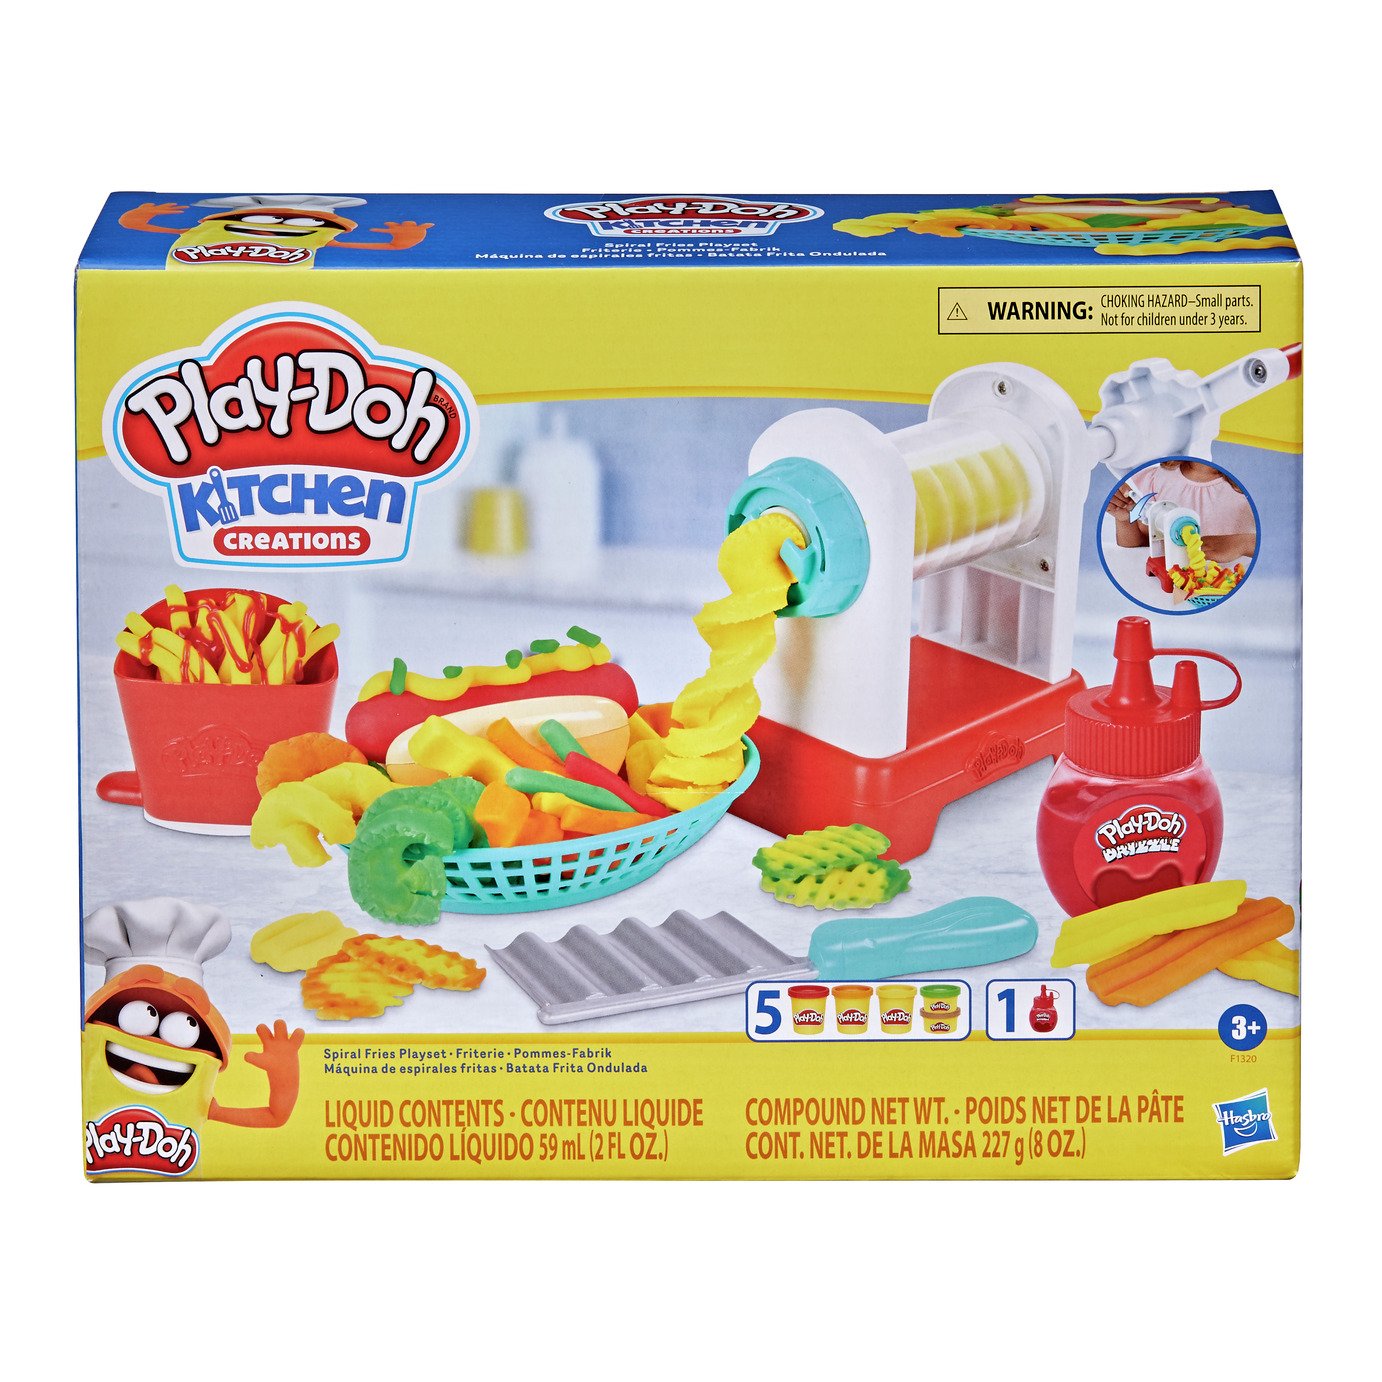 Play-Doh Kitchen Creations Spiral Fries Playset review